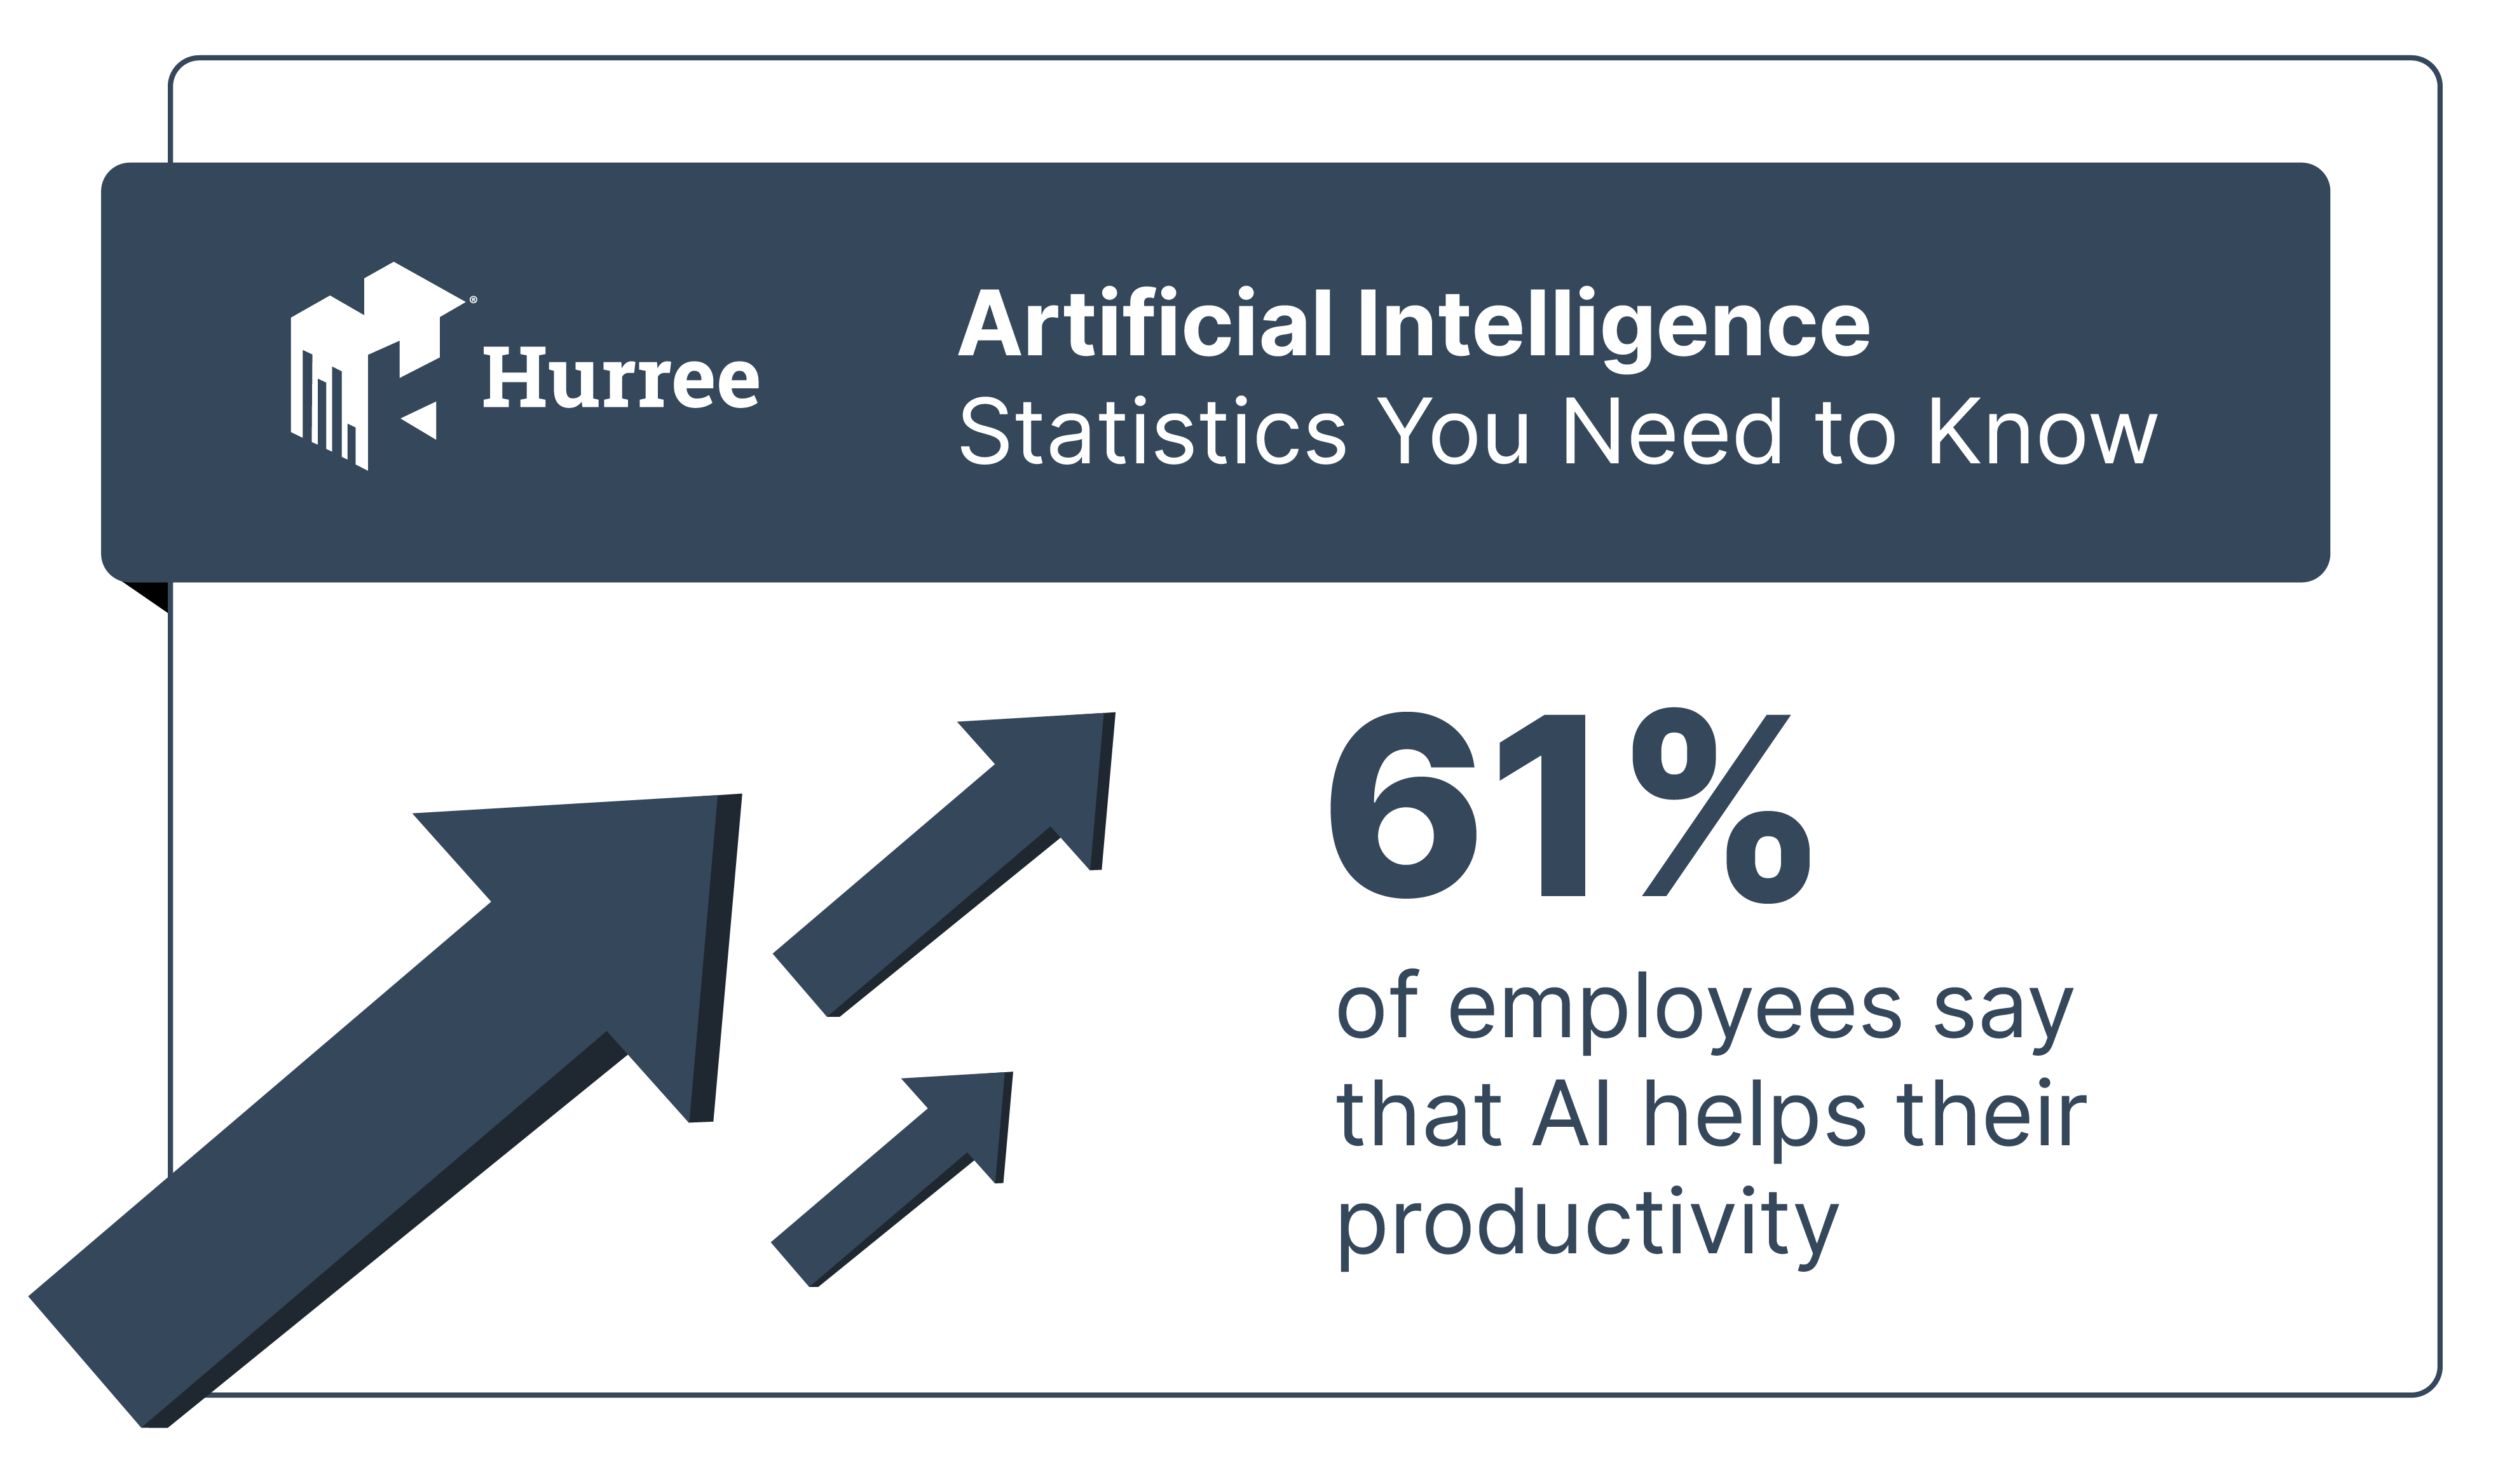 61% of employees say that AI helps their productivity